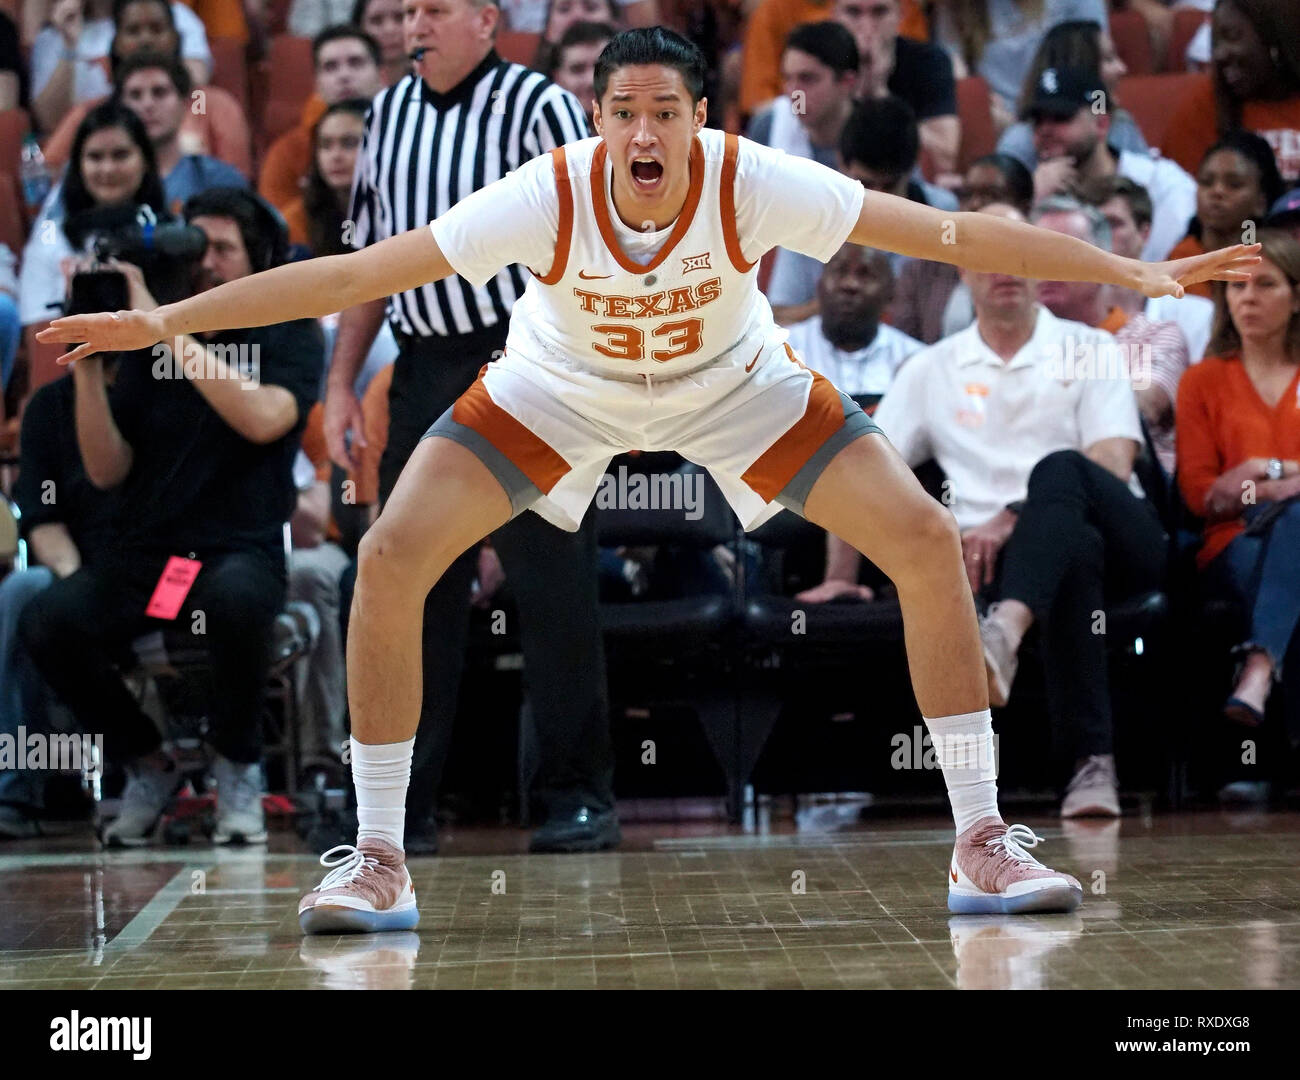 March 9, 2019. Kamaka Hepa #33 of the Texas Longhorns in action vs the TCU Horned Frogs at the Frank Erwin Center in Austin Texas. TCU beats Texas 69-54.Robert Backman/Cal Sport Media. Stock Photo